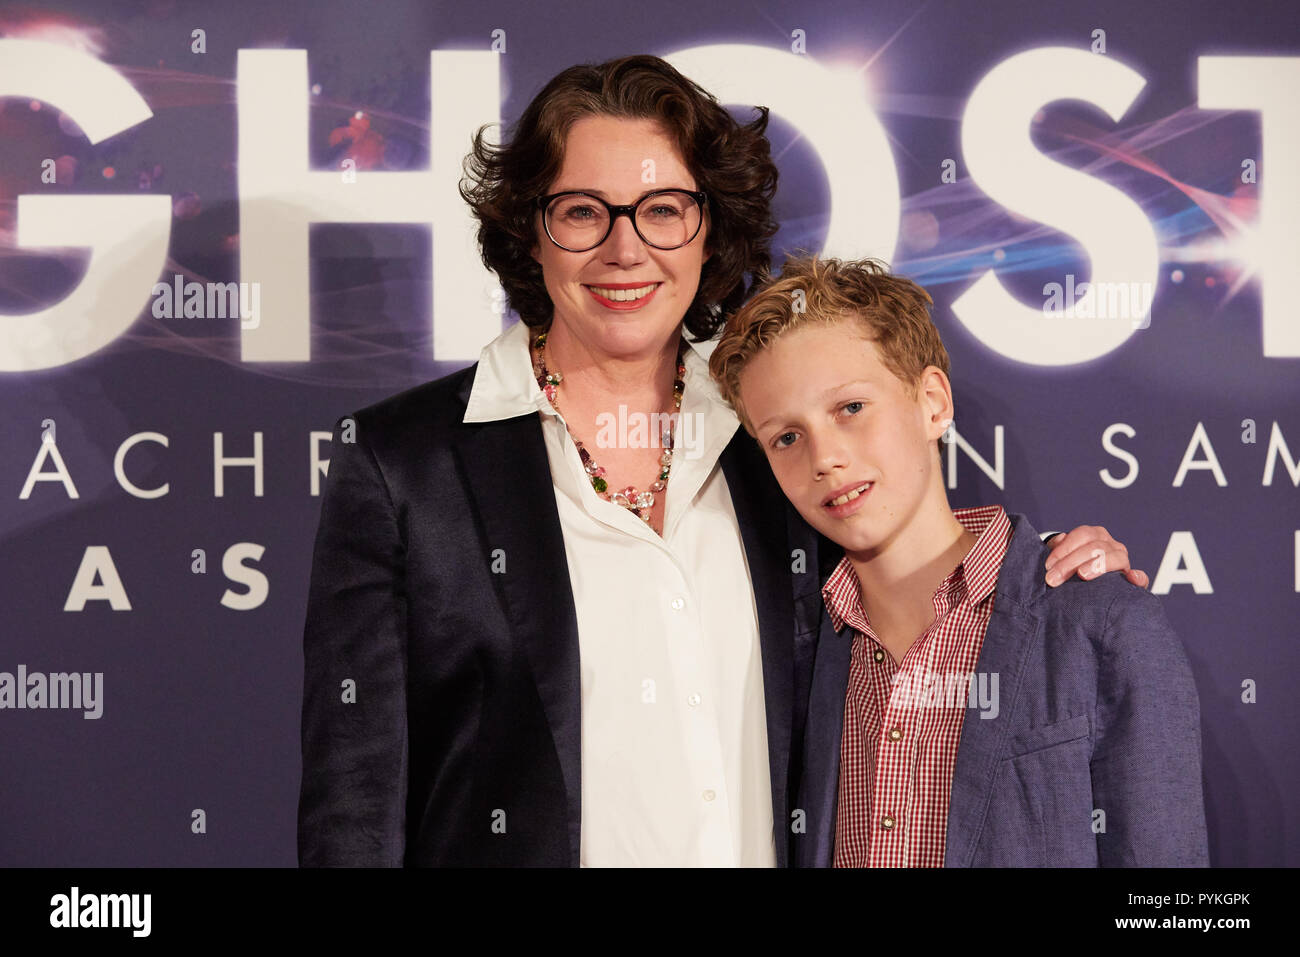 Hamburg, Germany. 28th Oct, 2018. Ildiko von Kürthy, writer and journalist,  and her son Gabor come to the Hamburg premiere of the musical "Ghost". The  musical will be a guest at the